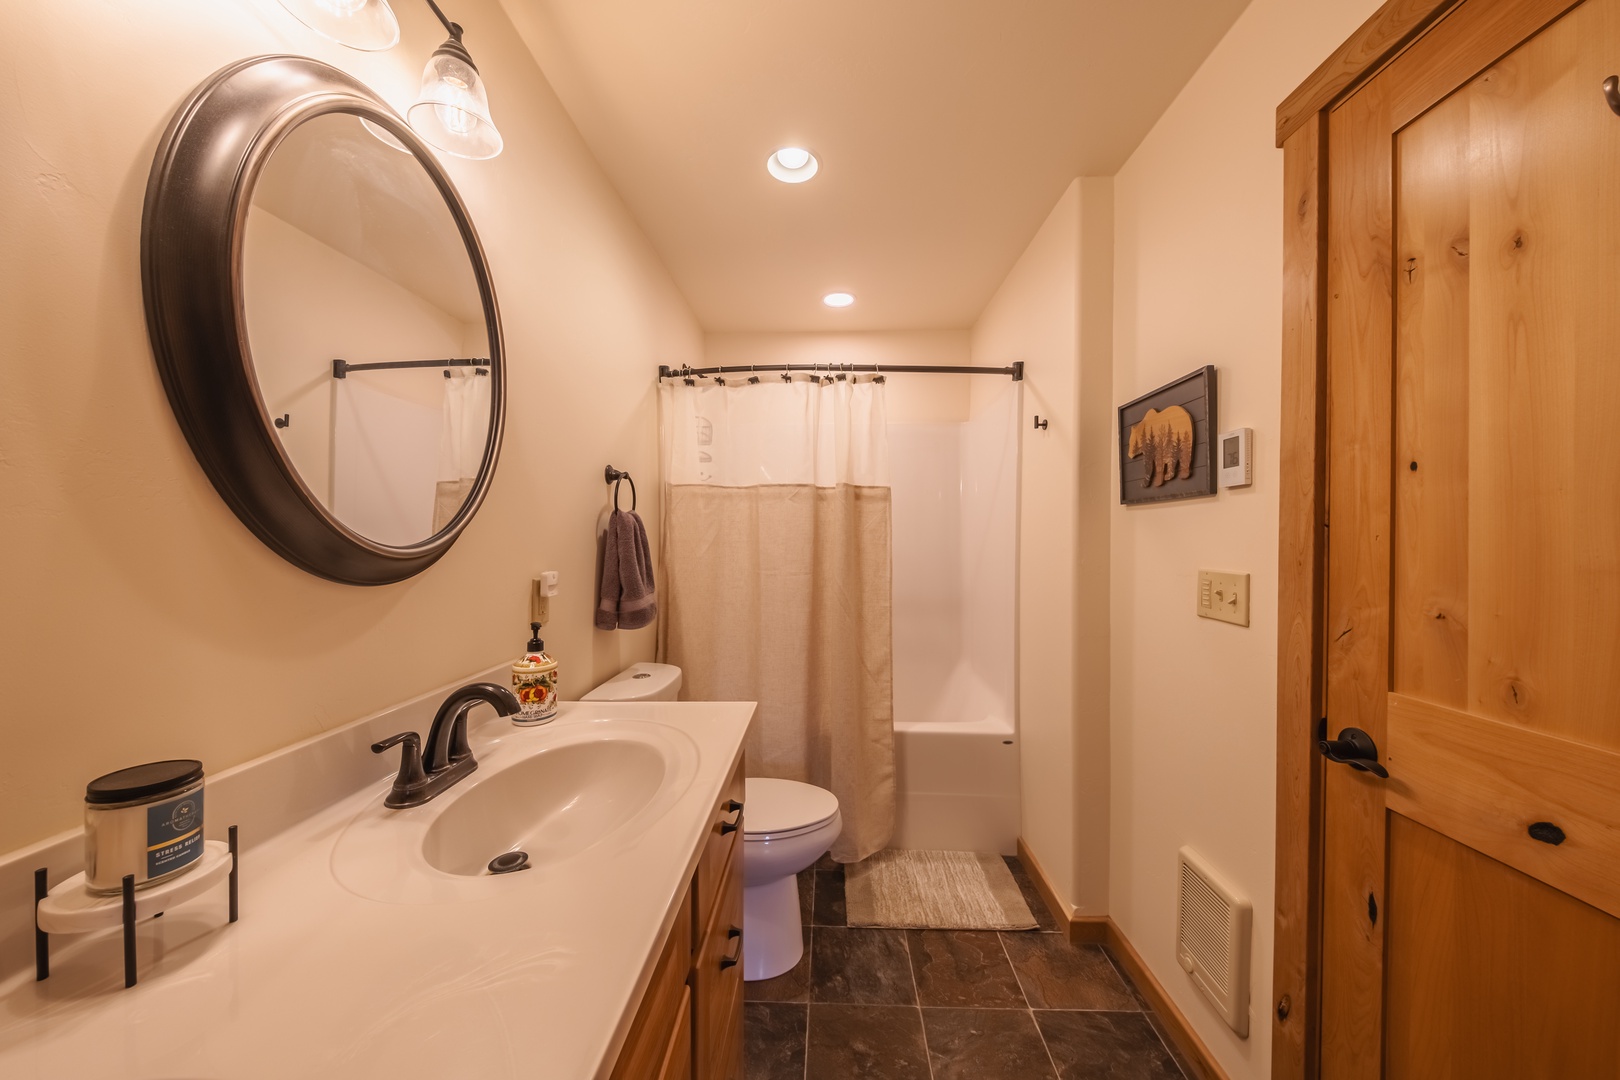 Shared ensuite bathroom with shower/tub combo